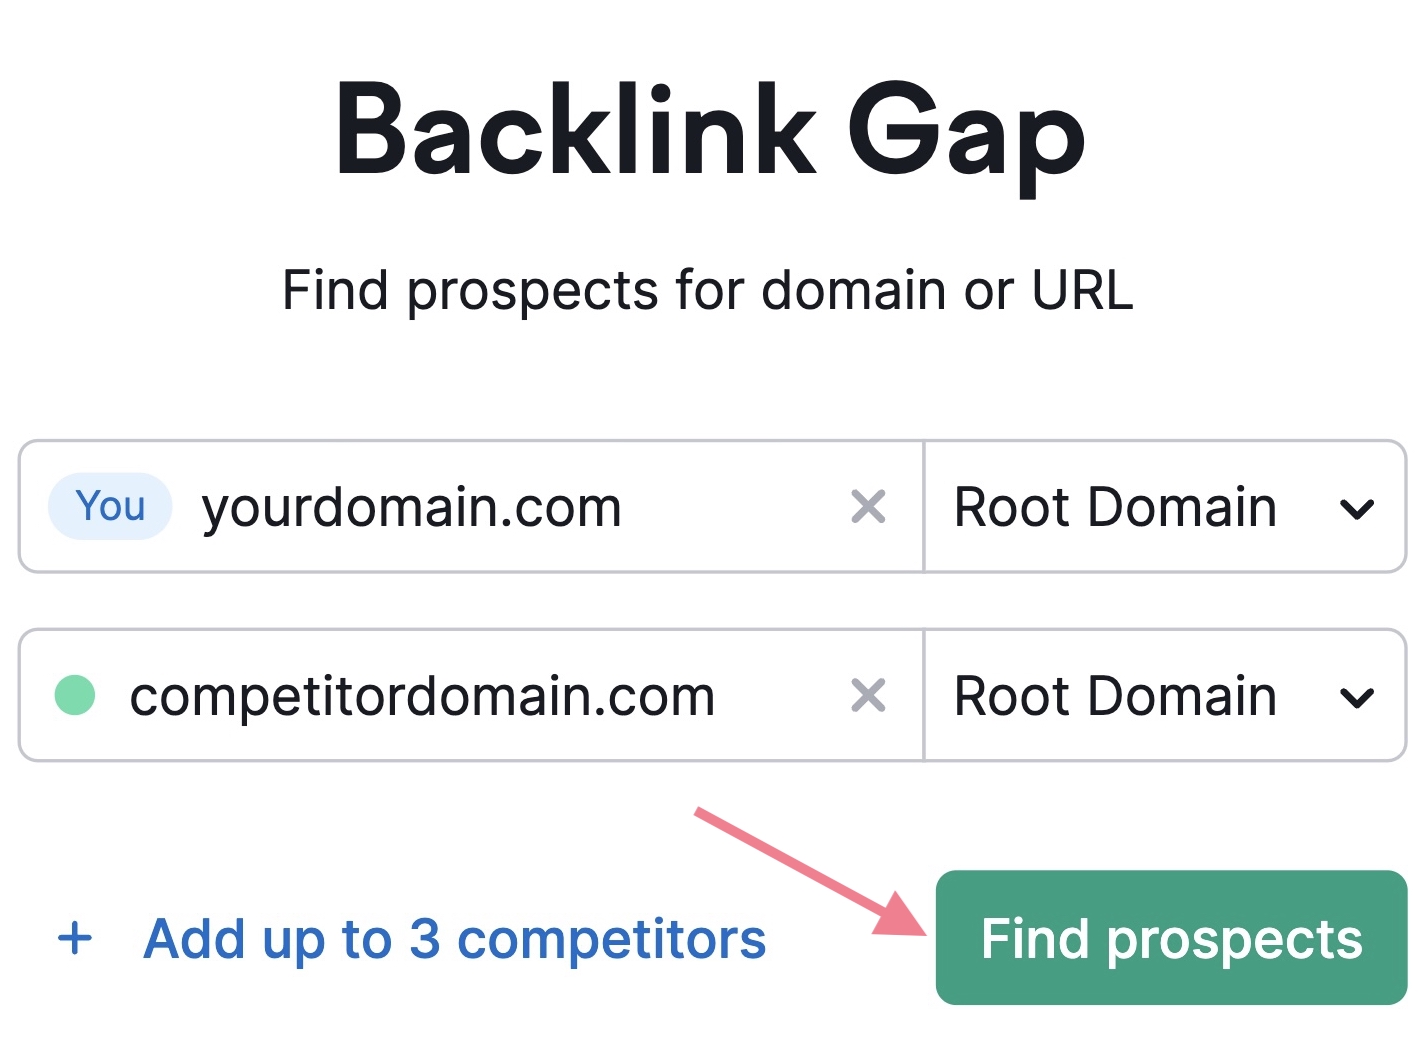 enter yours and competitor's domain successful  Backlink Gap tool.search